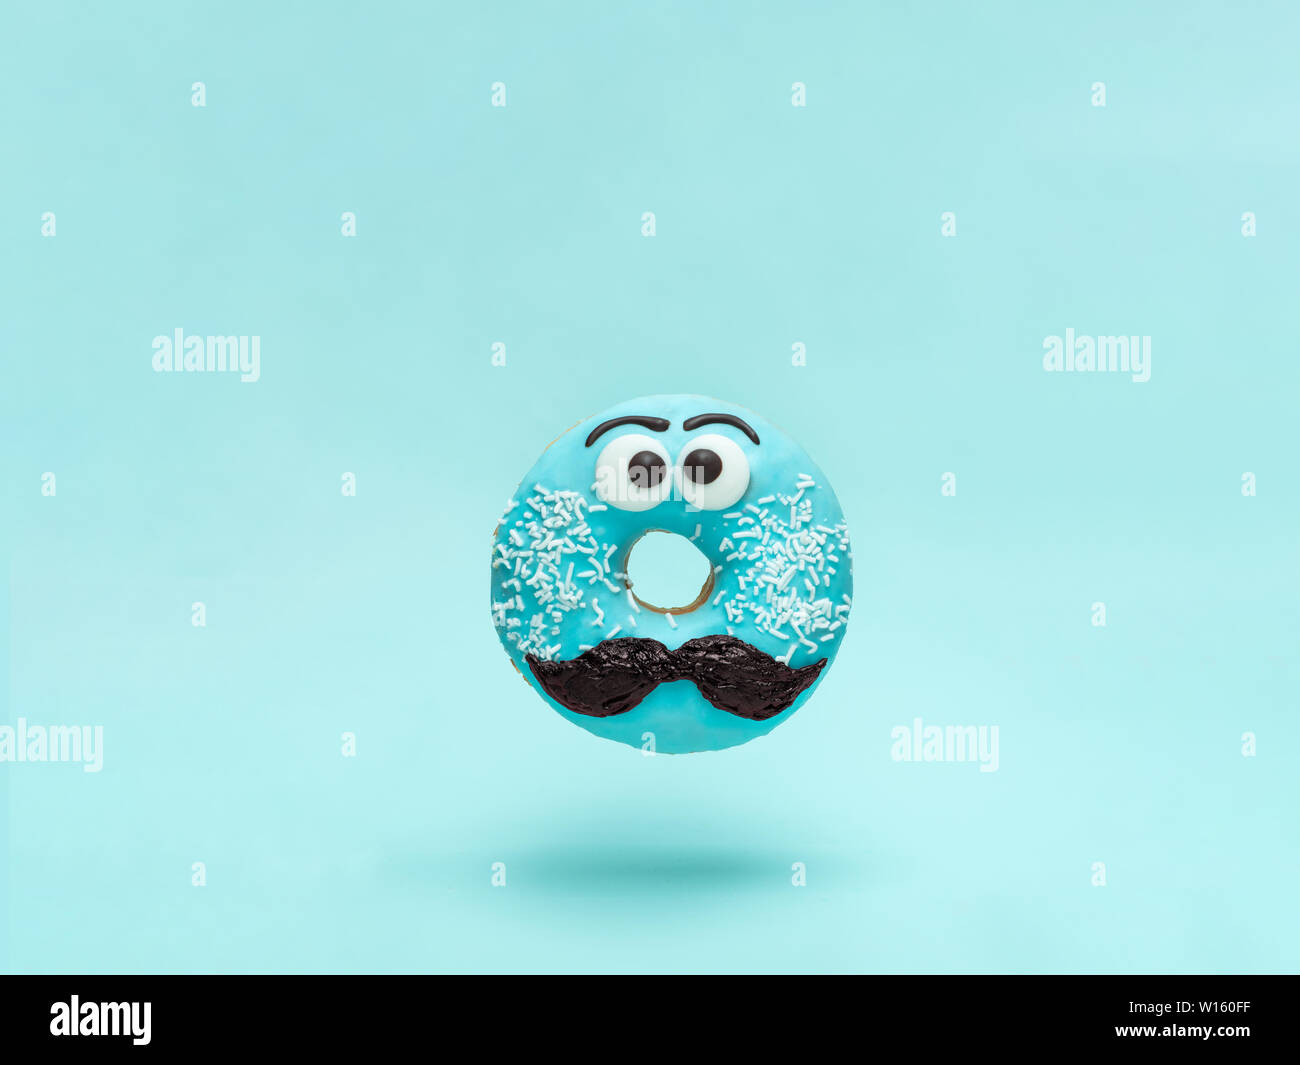 Blue glazed donut with mustache. Flying blue doughnut with funny face with mustache over blue background. Copy space for text. Masculinity or father day concept. Stock Photo